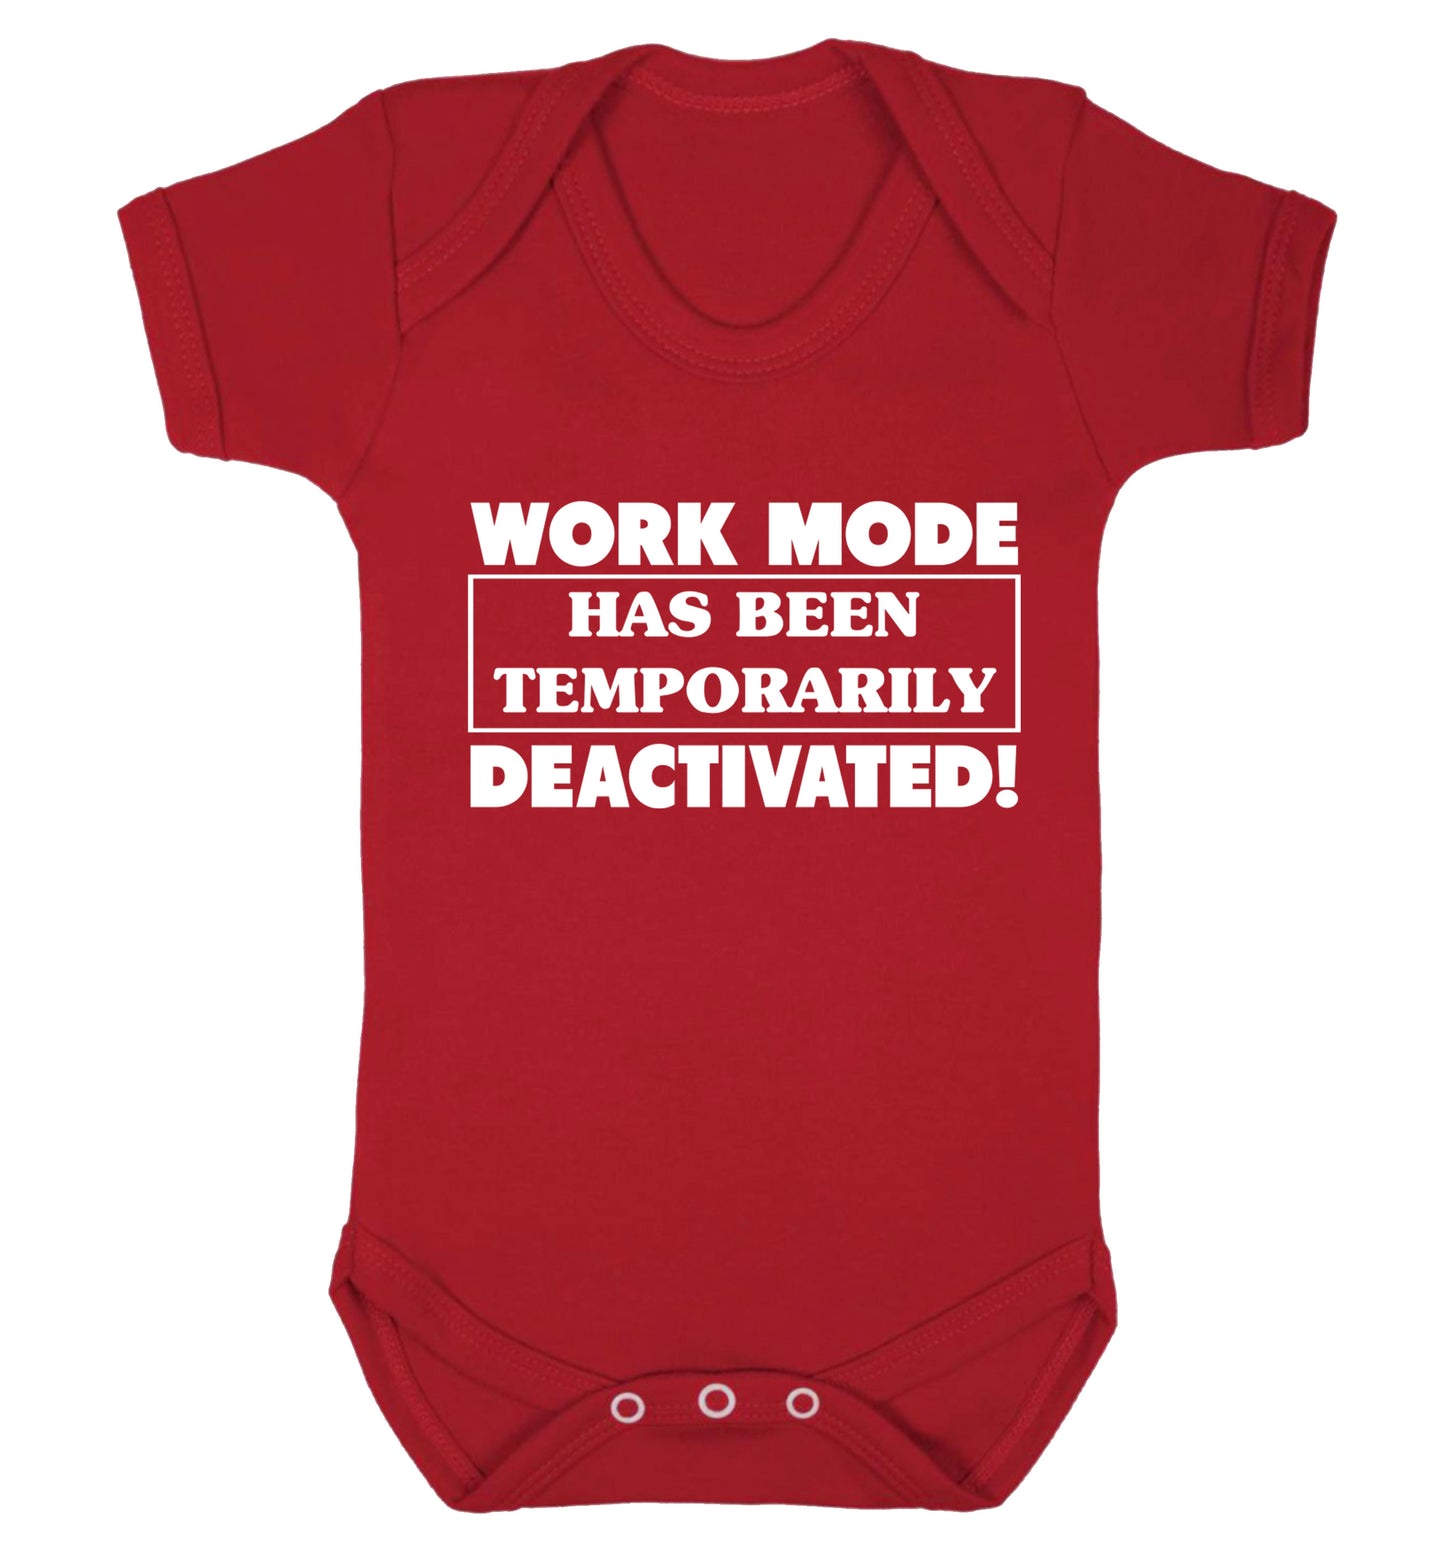 Work mode has now been temporarily deactivated Baby Vest red 18-24 months